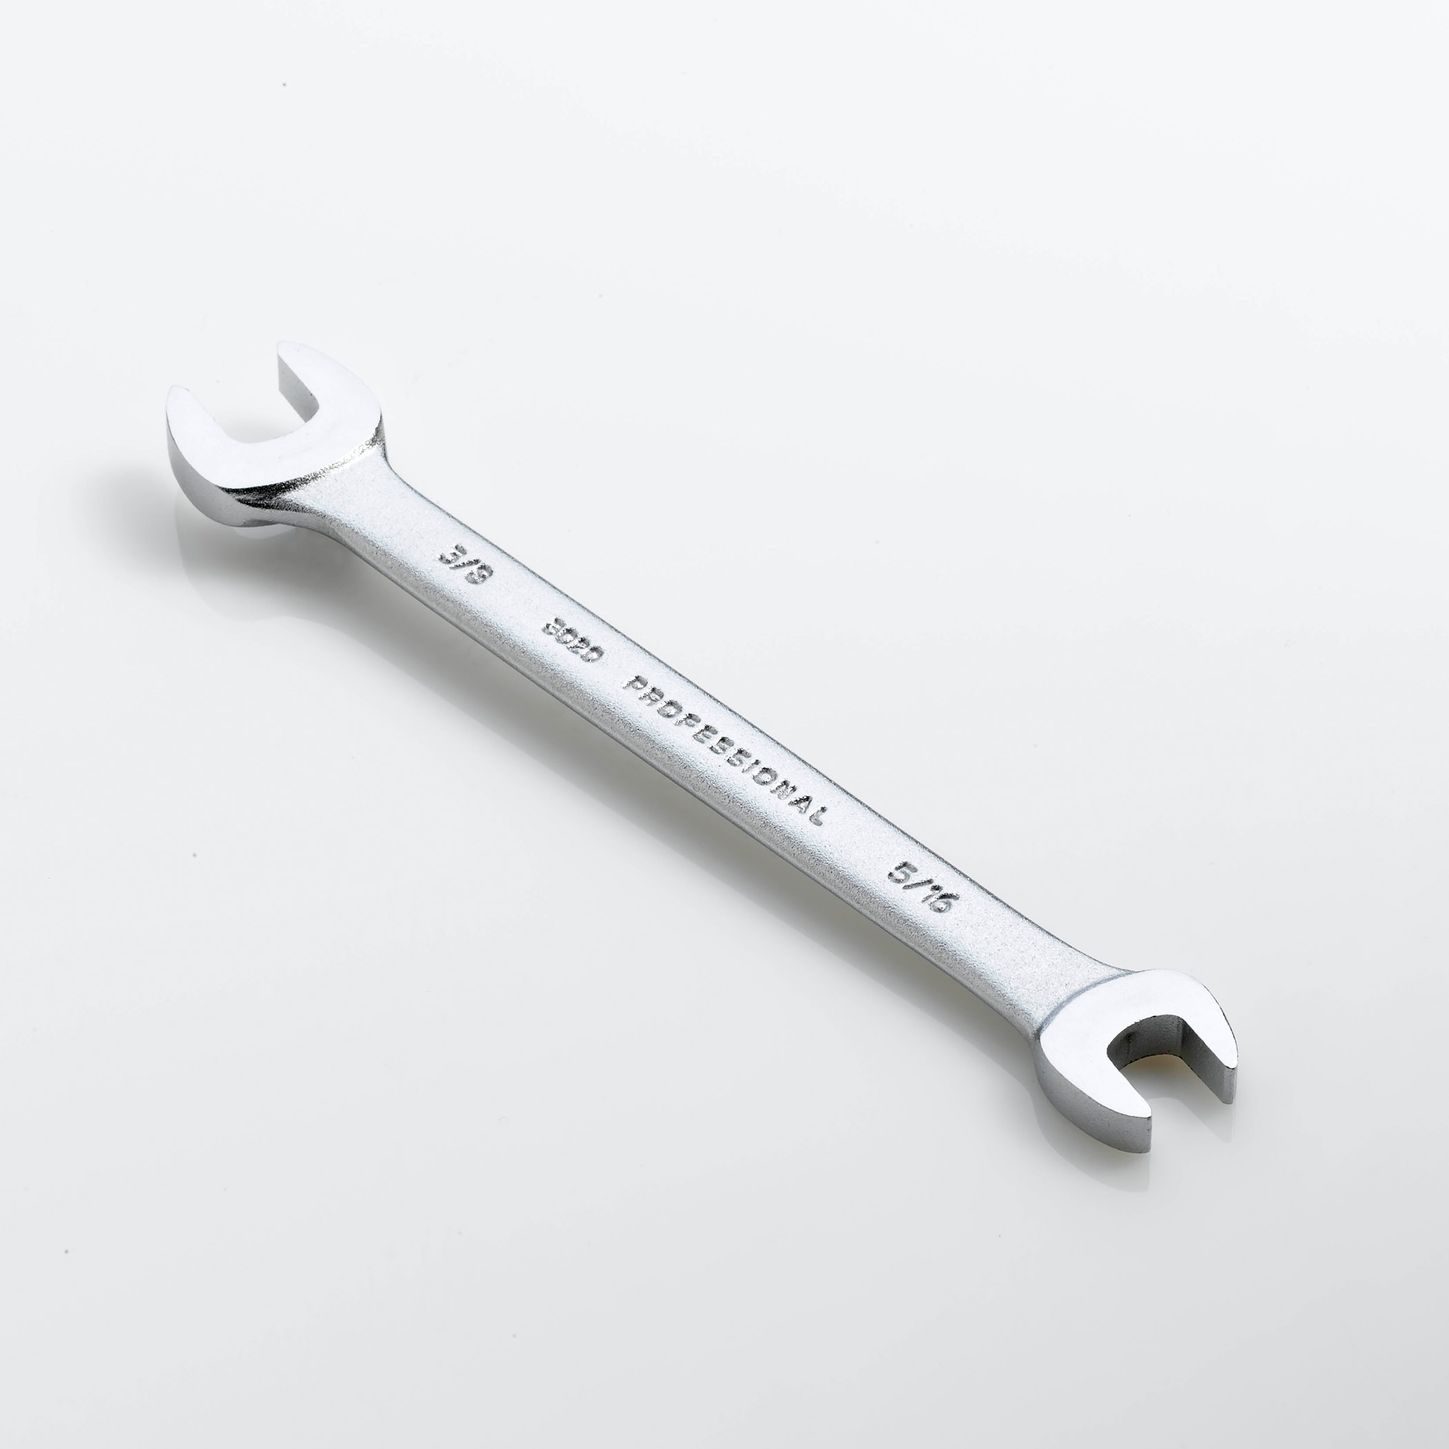 5/16 x 3/8" Open End Wrench